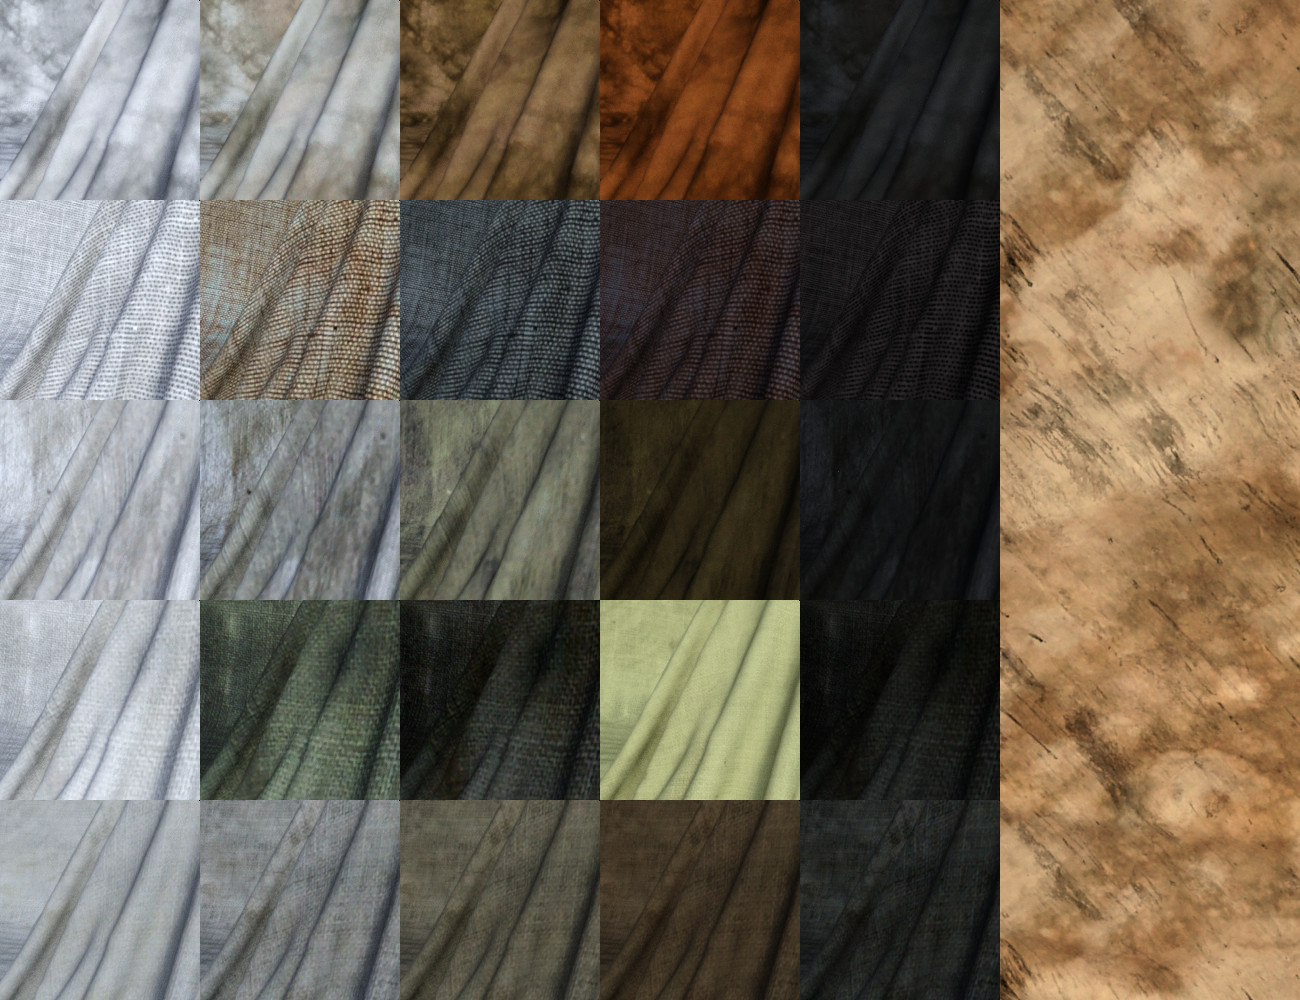 FSL Ragged and Dirty Fabric Shaders Iray by: Fuseling, 3D Models by Daz 3D